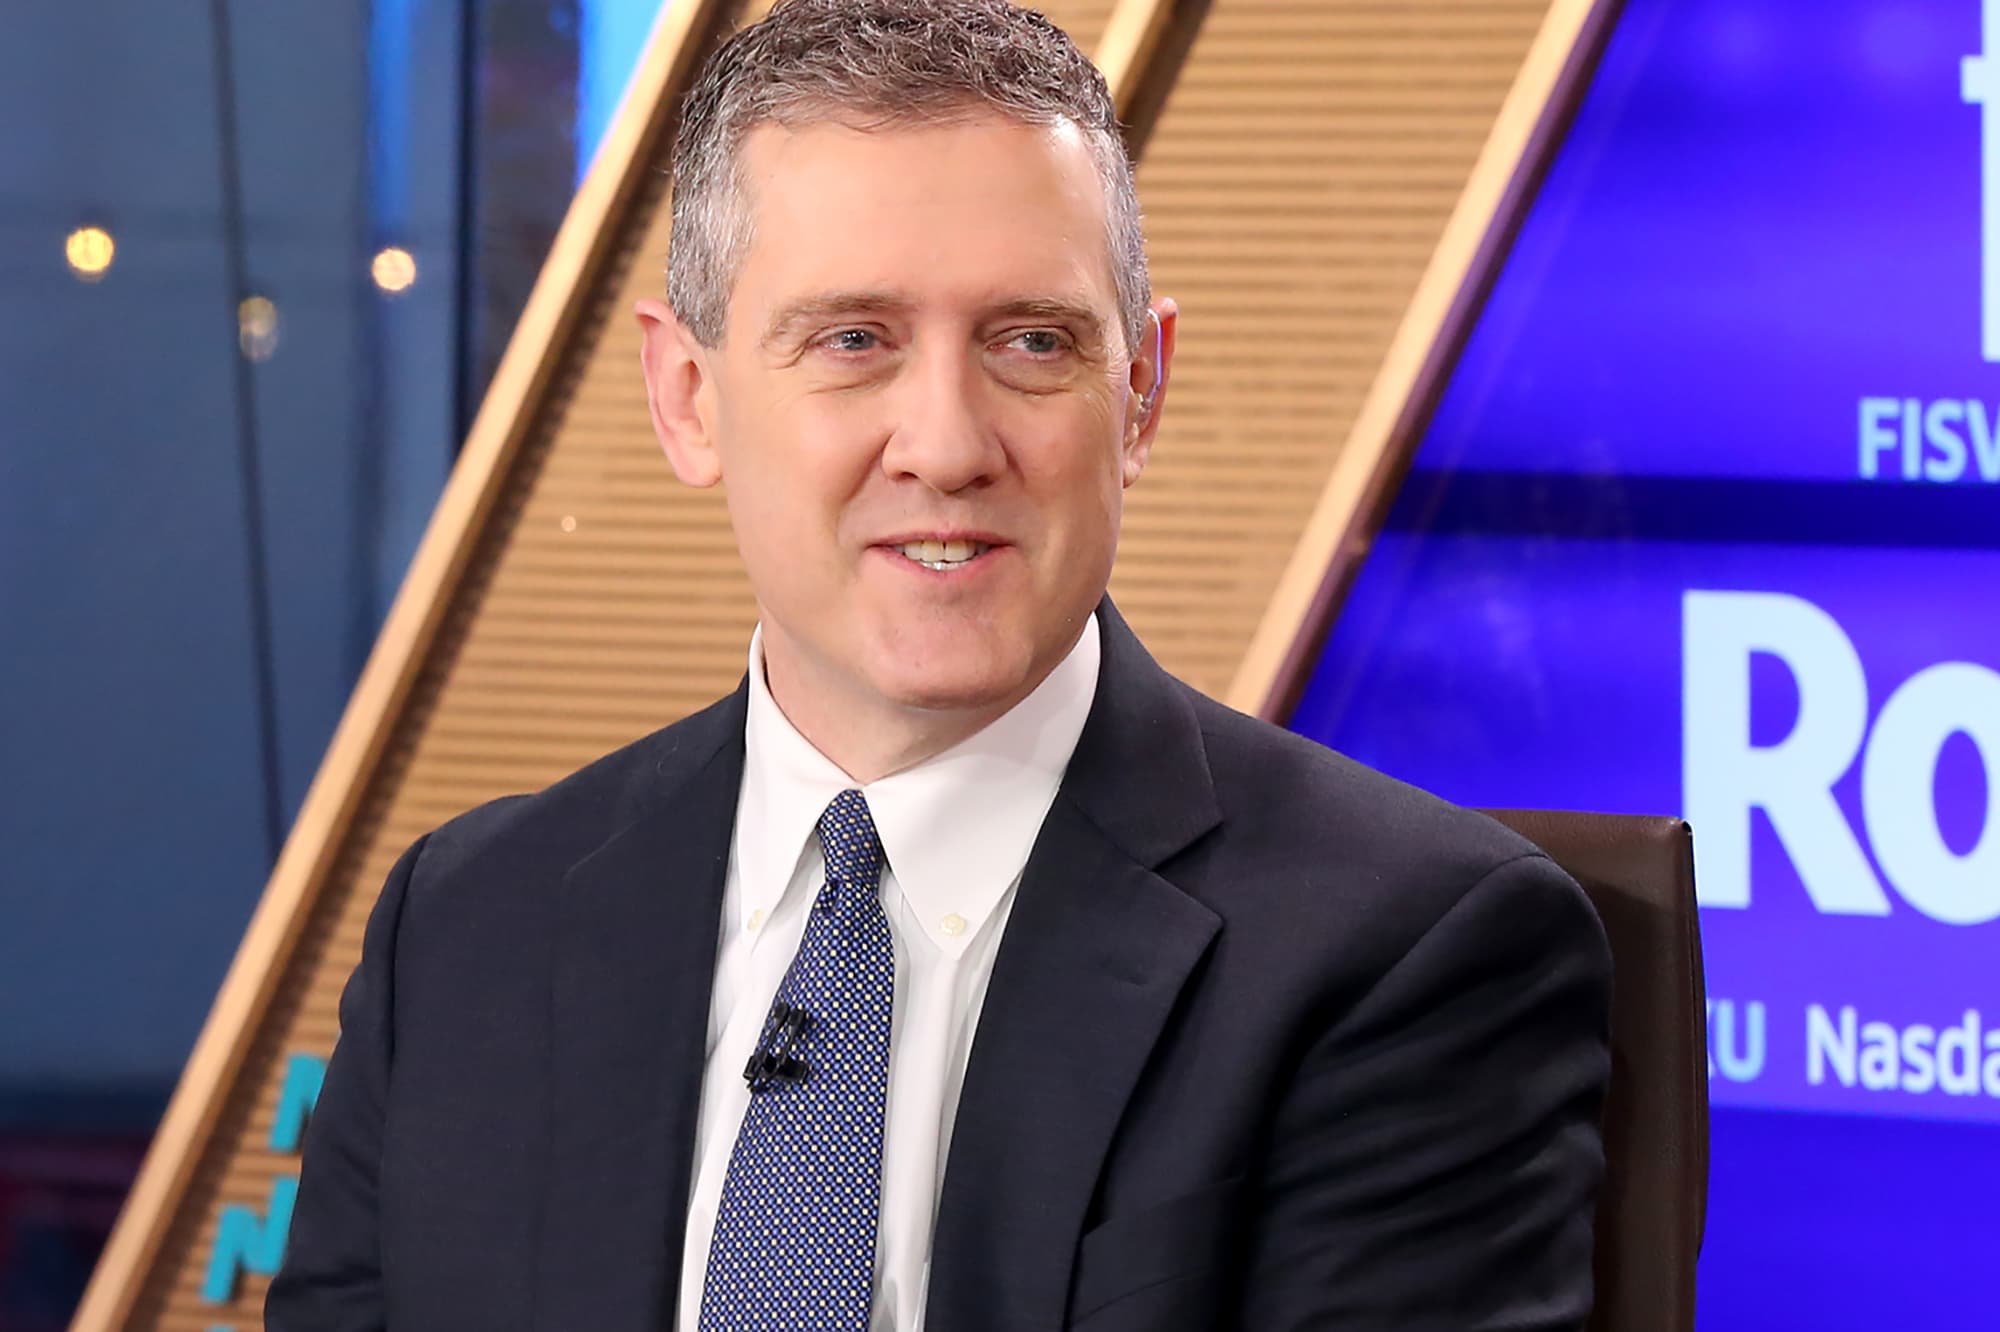 Fed Bullard sees no asset bubble and doubts policy will tighten anytime soon